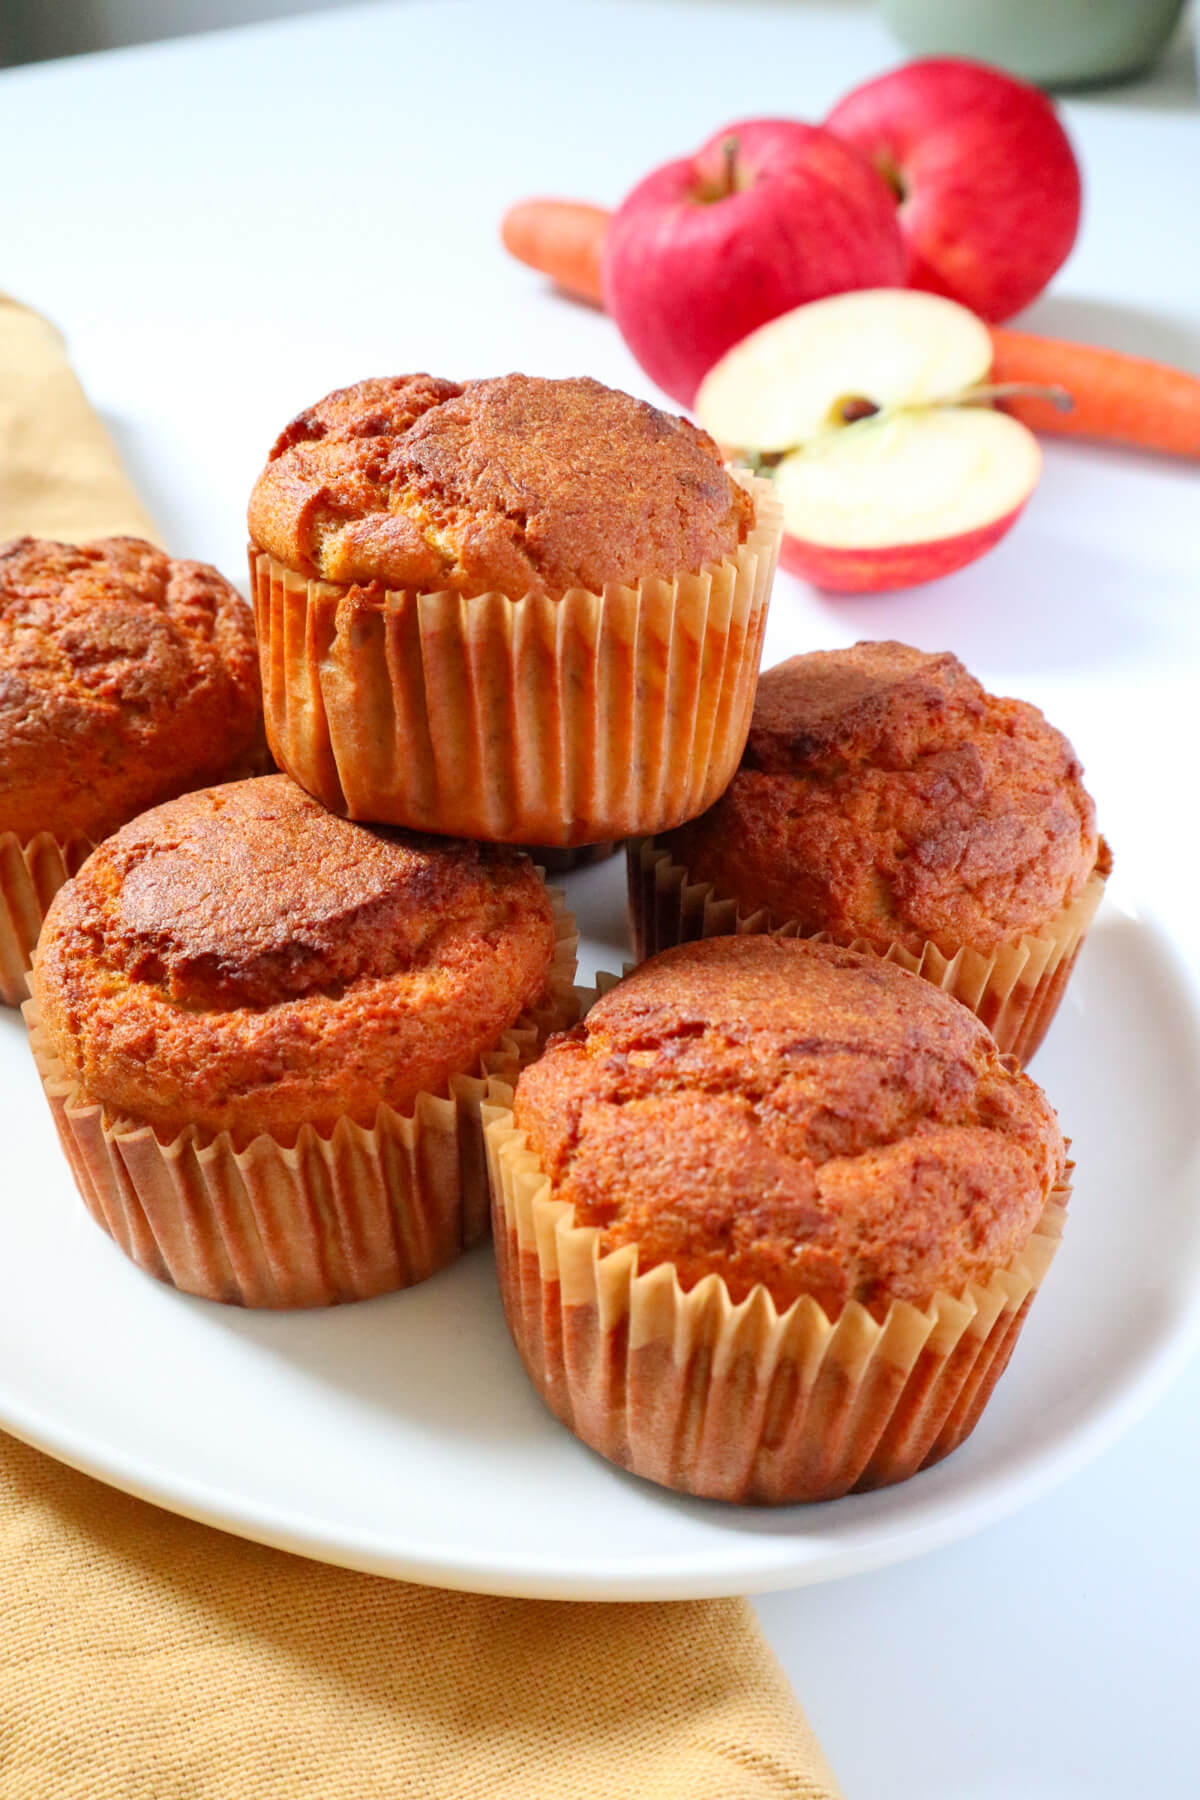 ABC muffins on a plate.